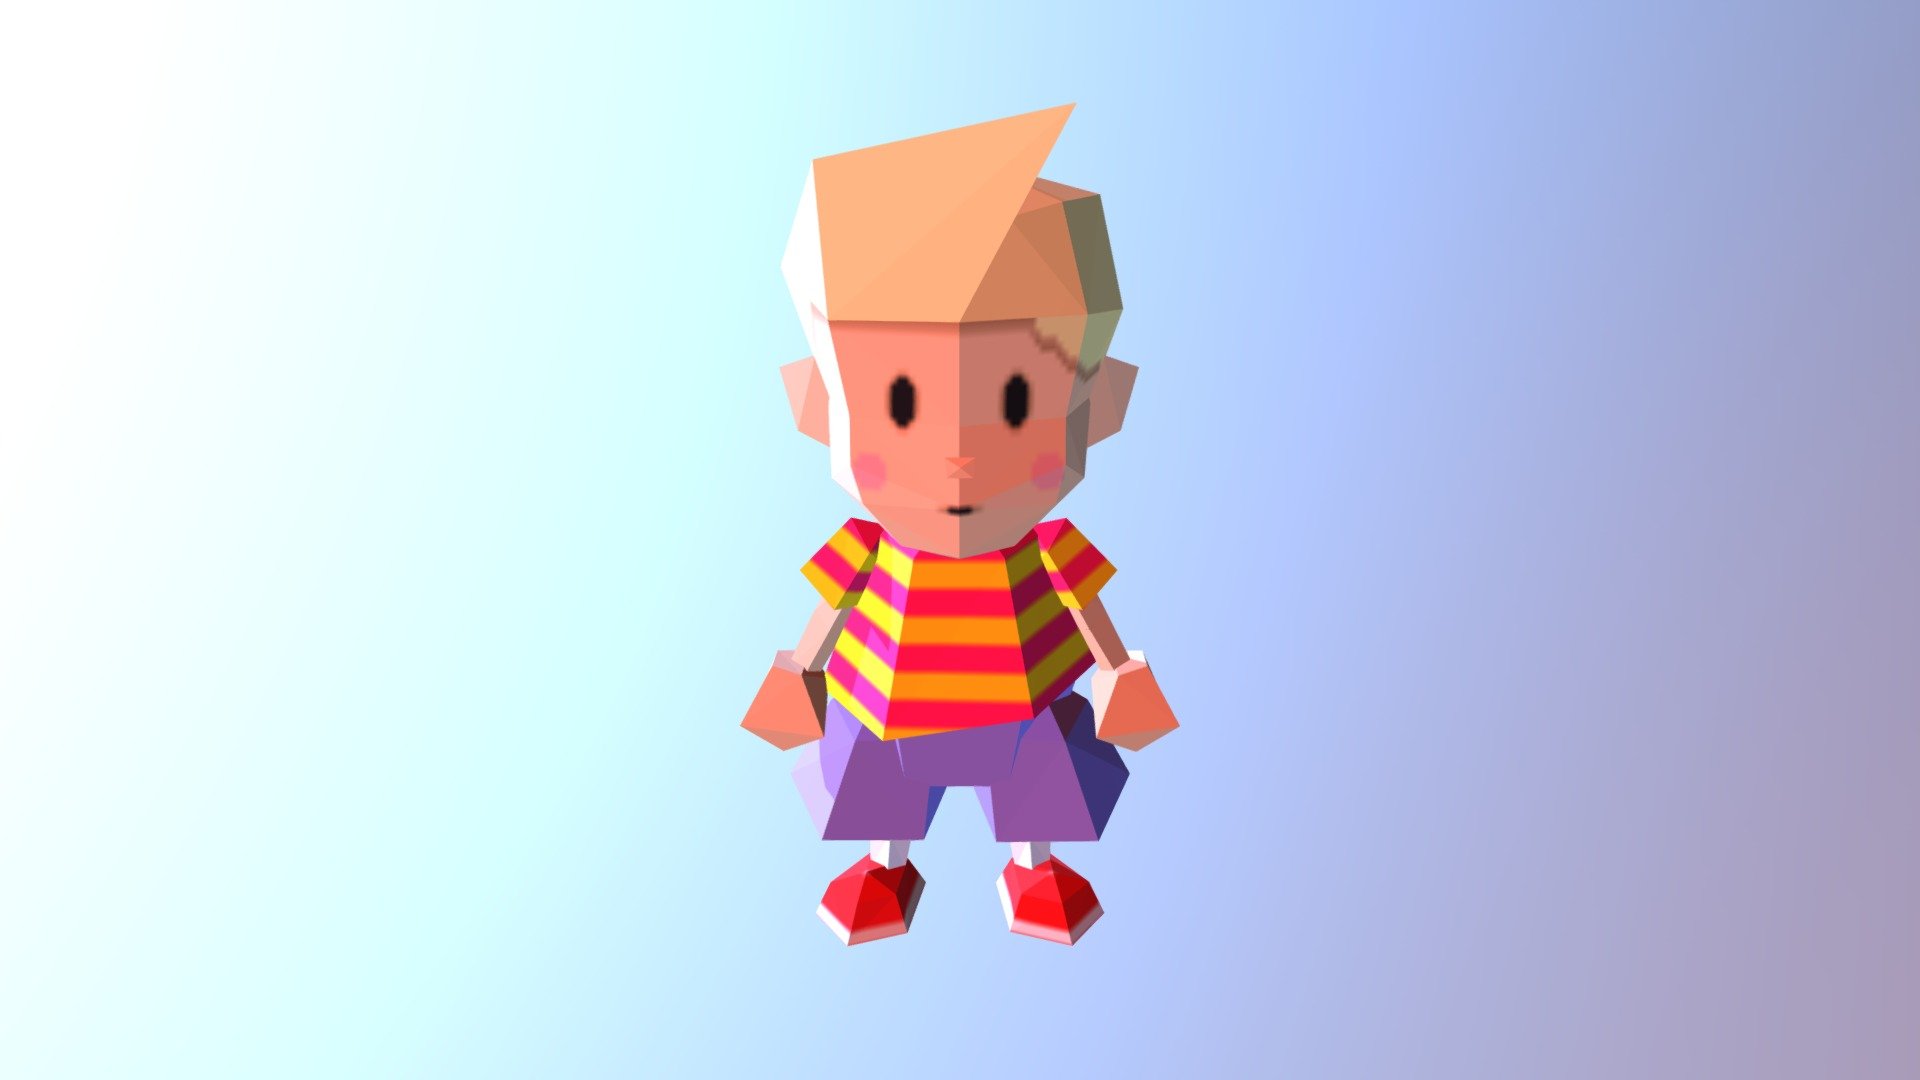 Nother 3 Lucas N64 Style